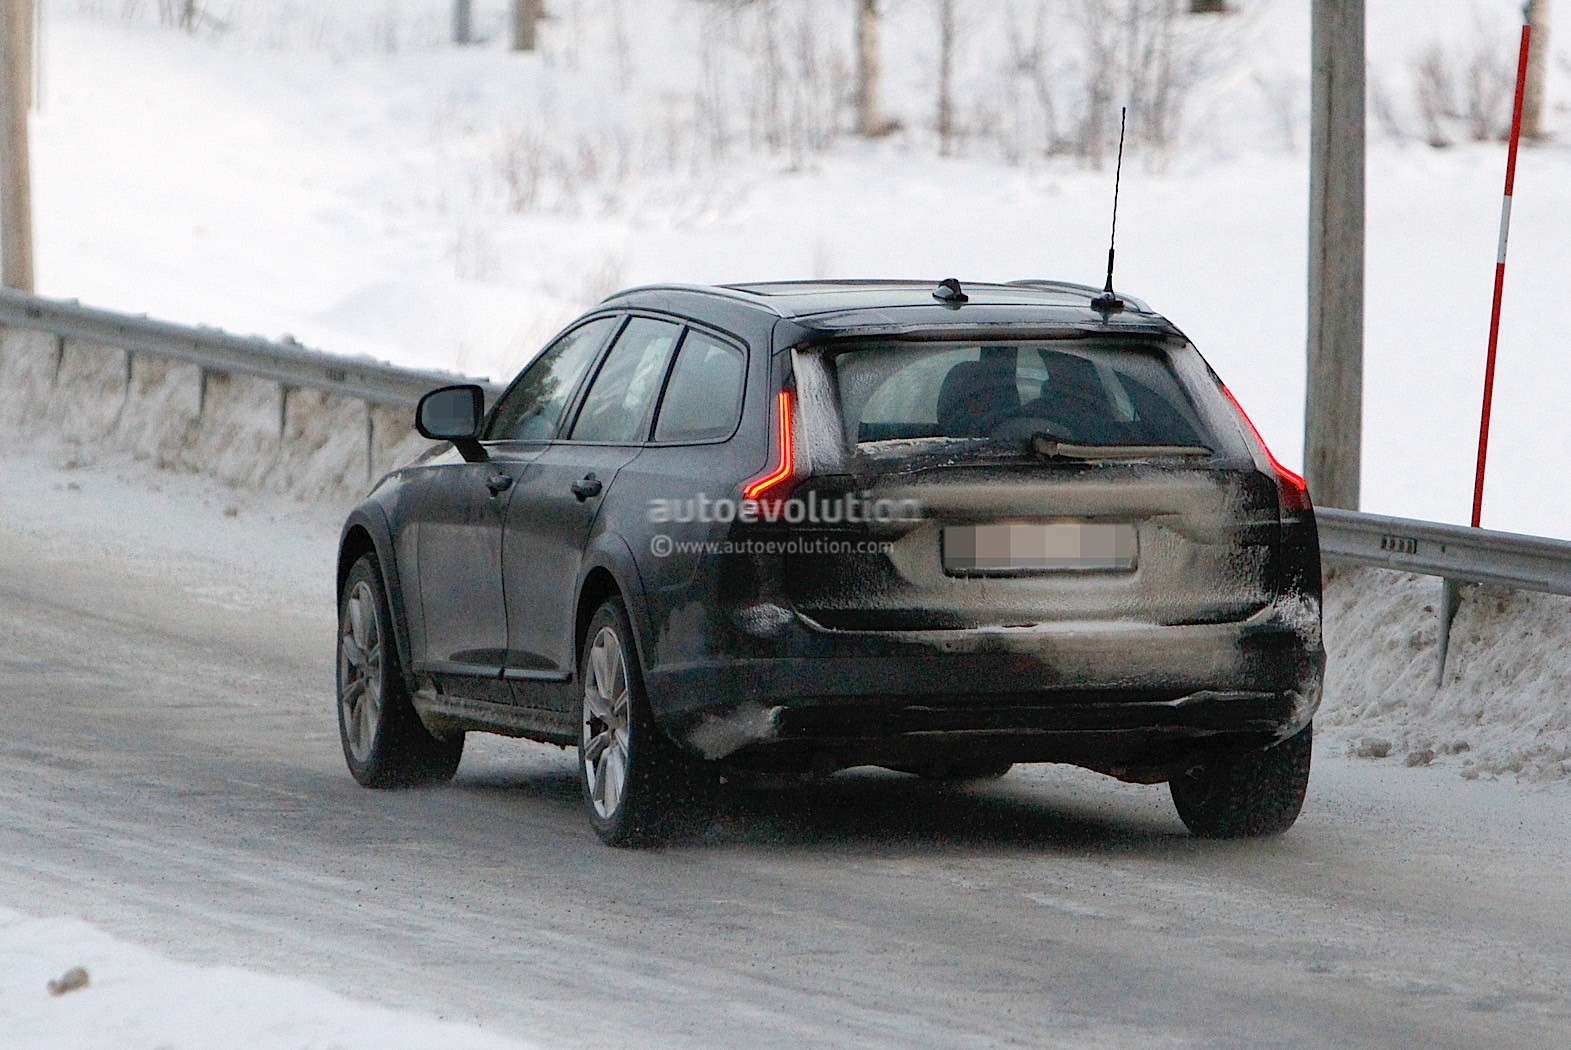 https://s1.cdn.autoevolution.com/images/news/gallery/2021-volvo-s90-and-v90-facelift-wear-useless-camouflage-winter-testing_4.jpg